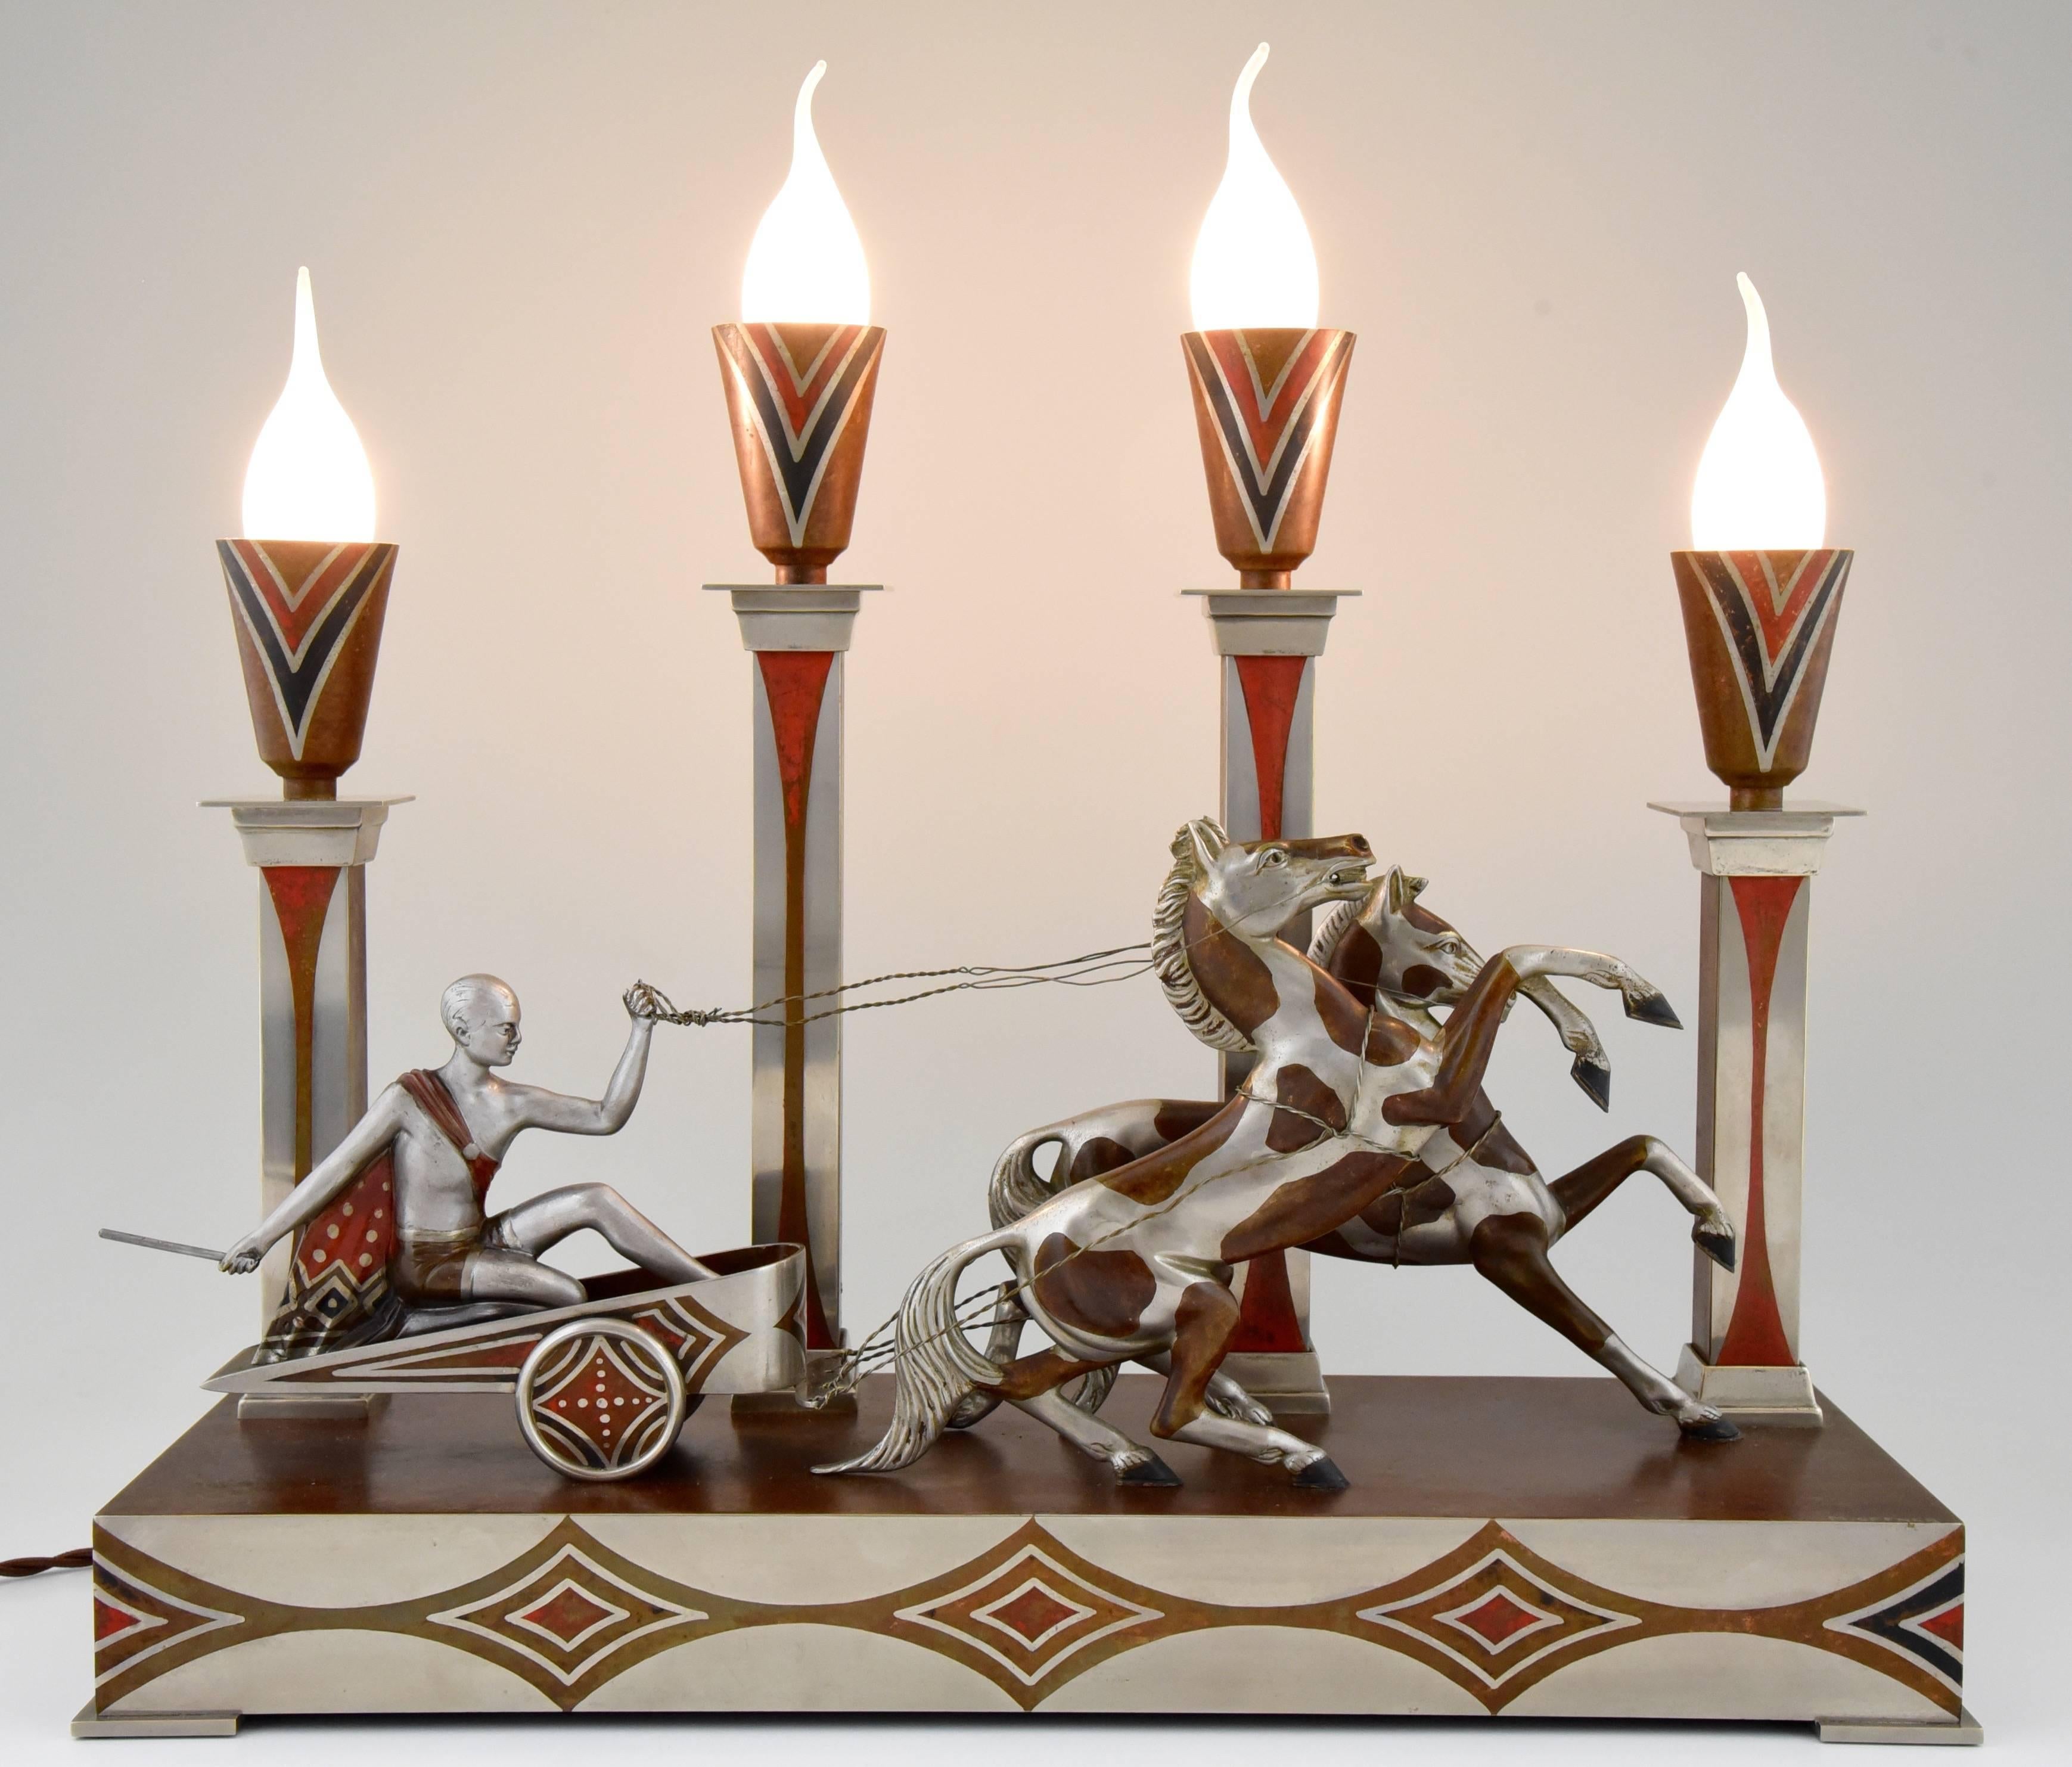 Rare French Art Deco four-light table lamp with charioteer and two horses signed by M. Offner with multicolor patina.

Artist or maker:
M. Offner.
Signature or marks:
M. Offner.
Style:
Art Deco.
Date:
1930.
Material:
Bronze and metal with